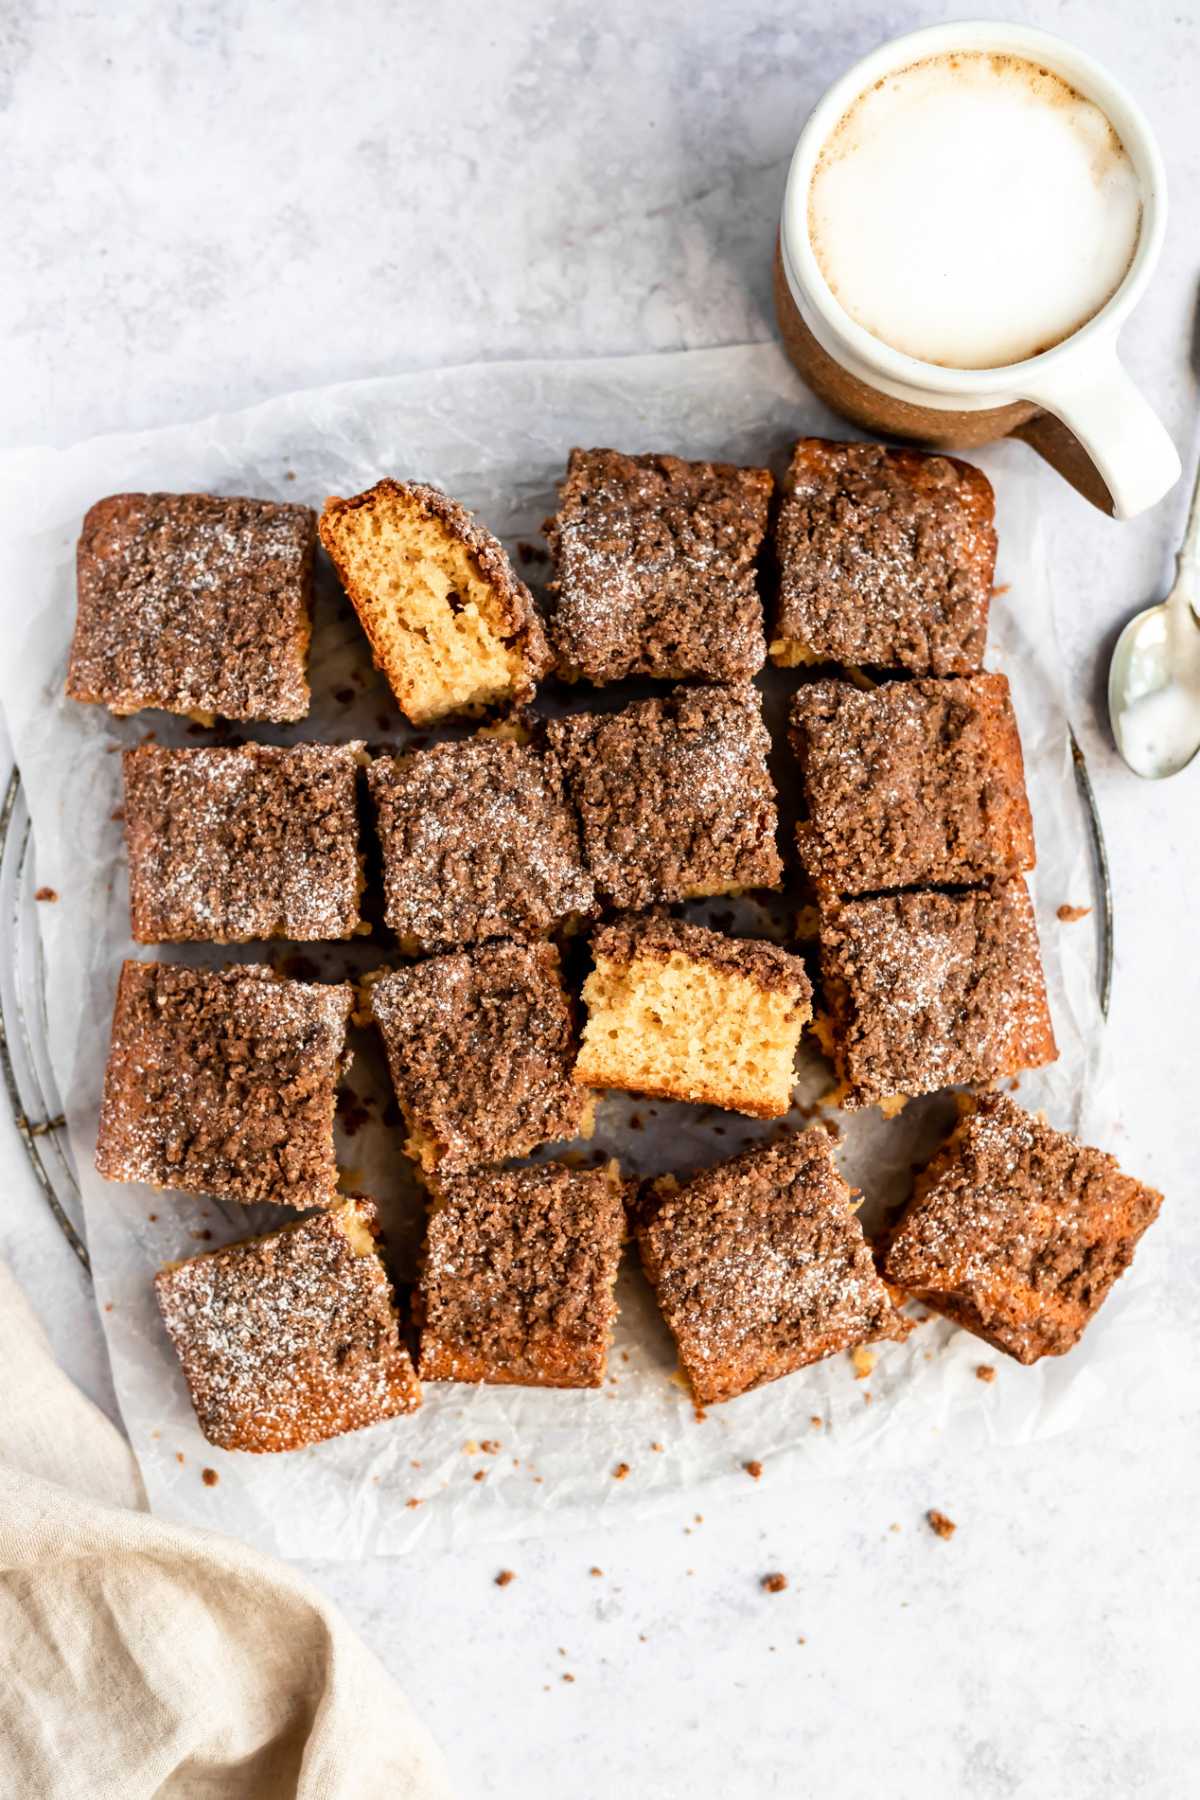 Pieces of coffee cake cut into squares.